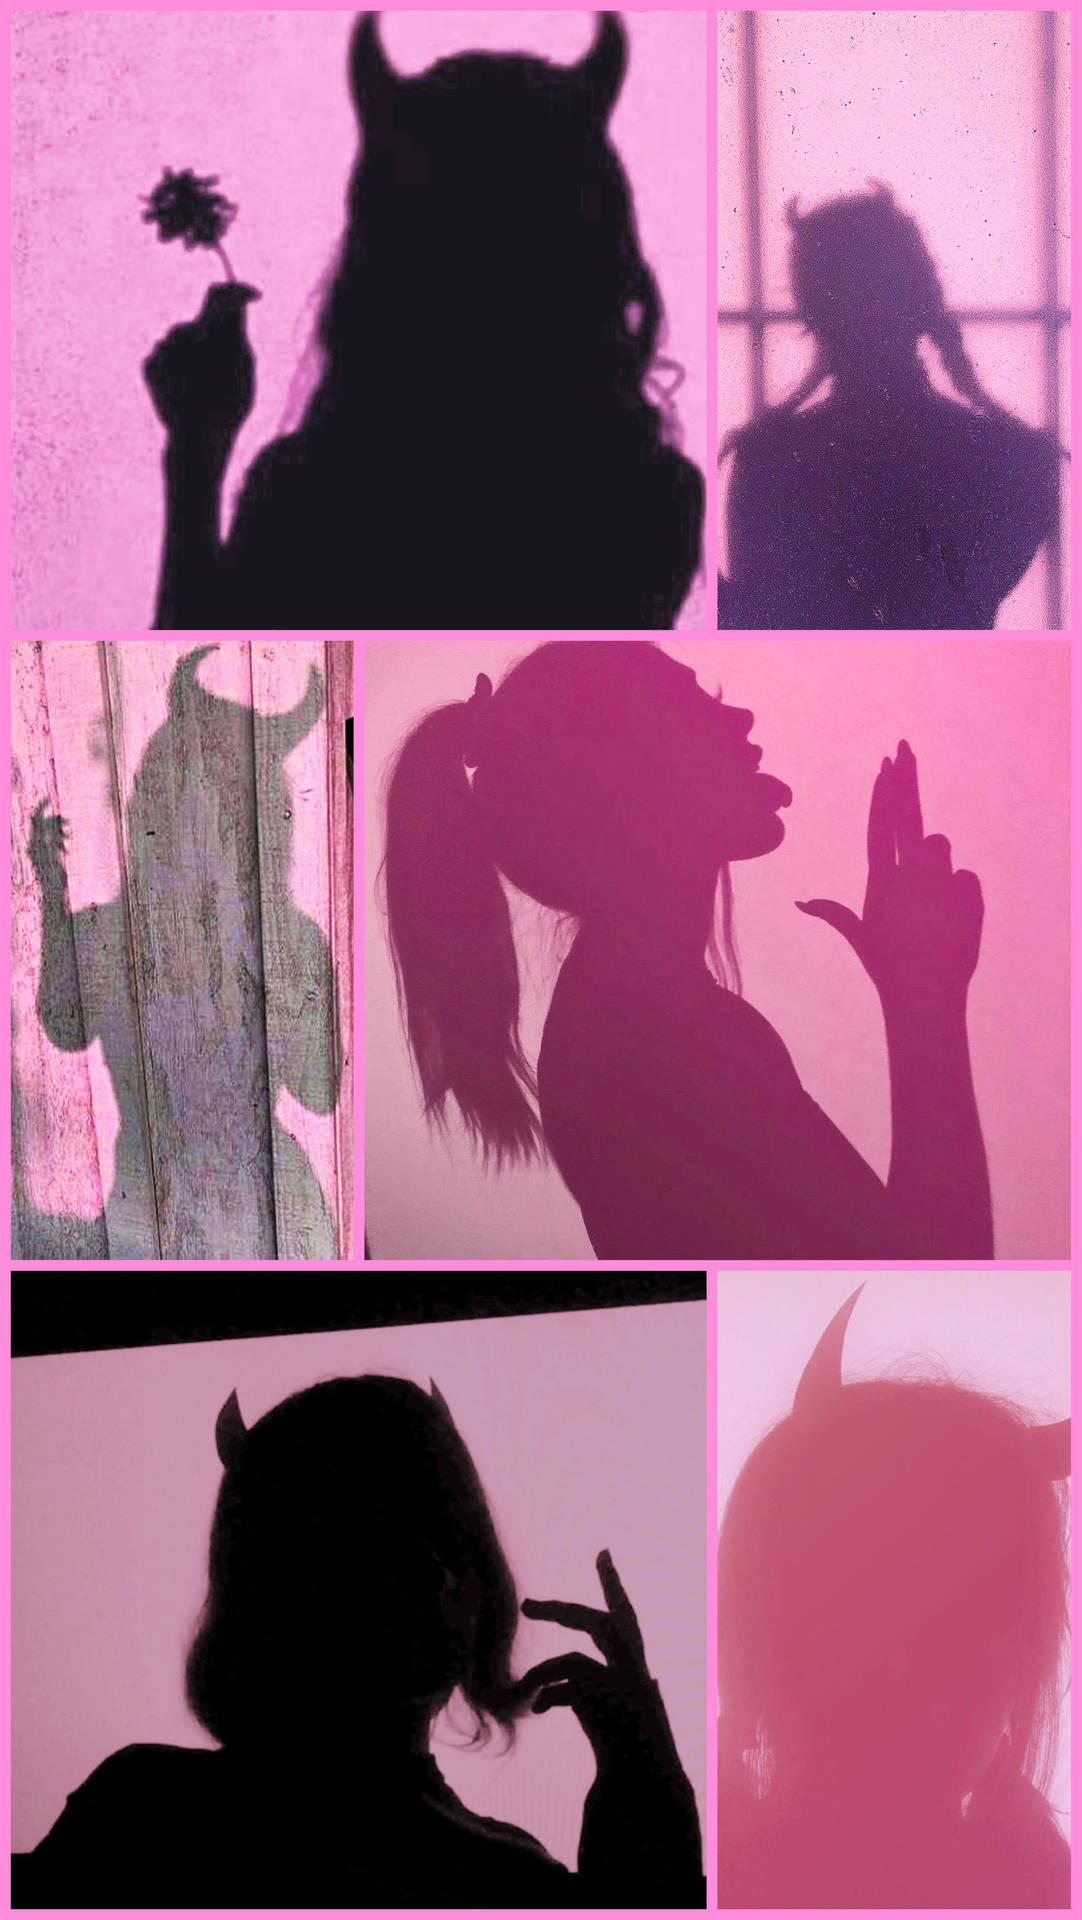 A Collage Of Shadows Of A Woman With Horns Wallpaper